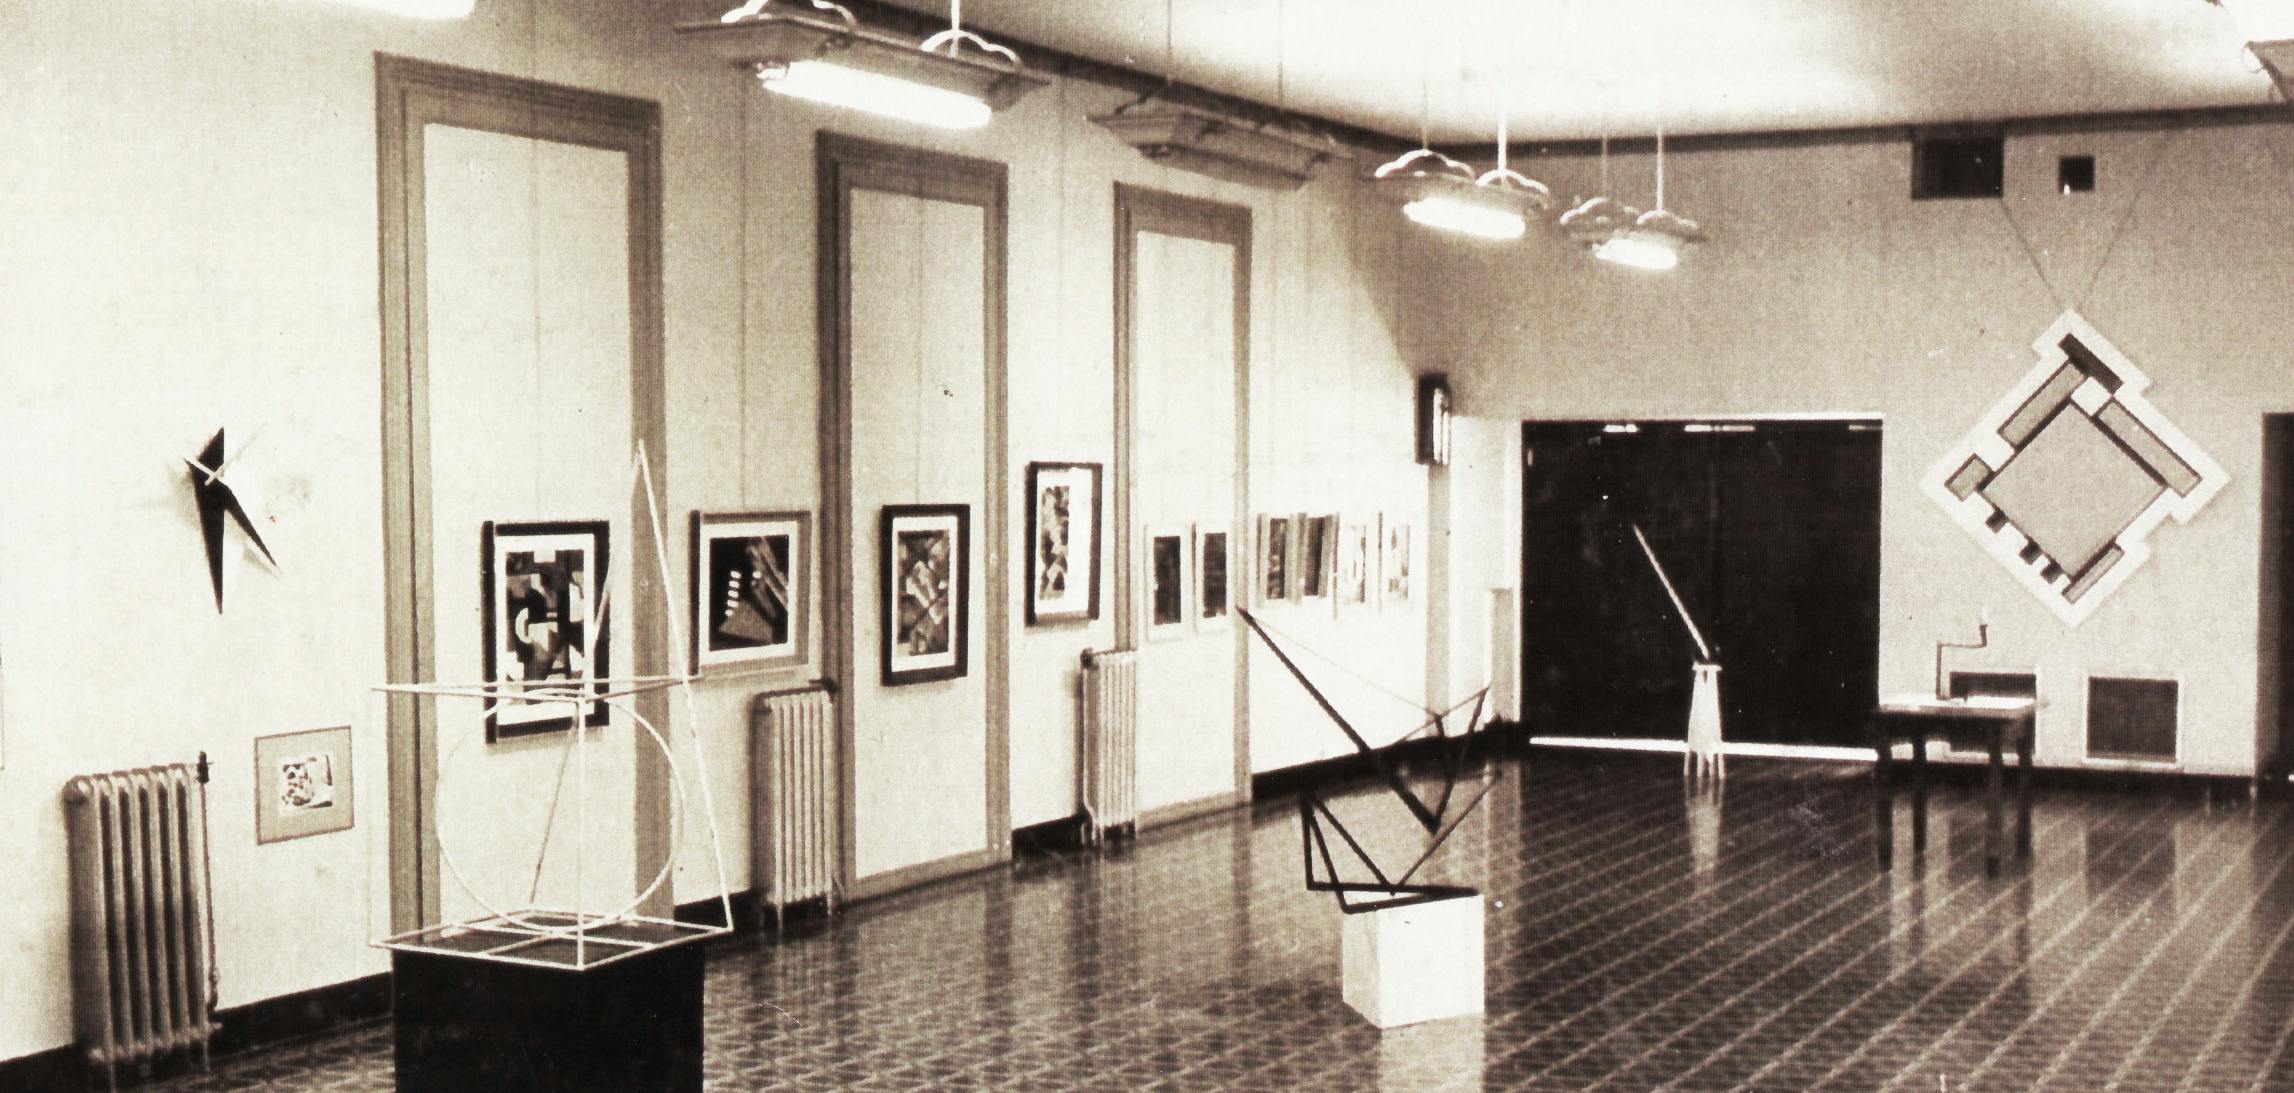 An installation view of paintings and four geometric sculptures on pedestals.